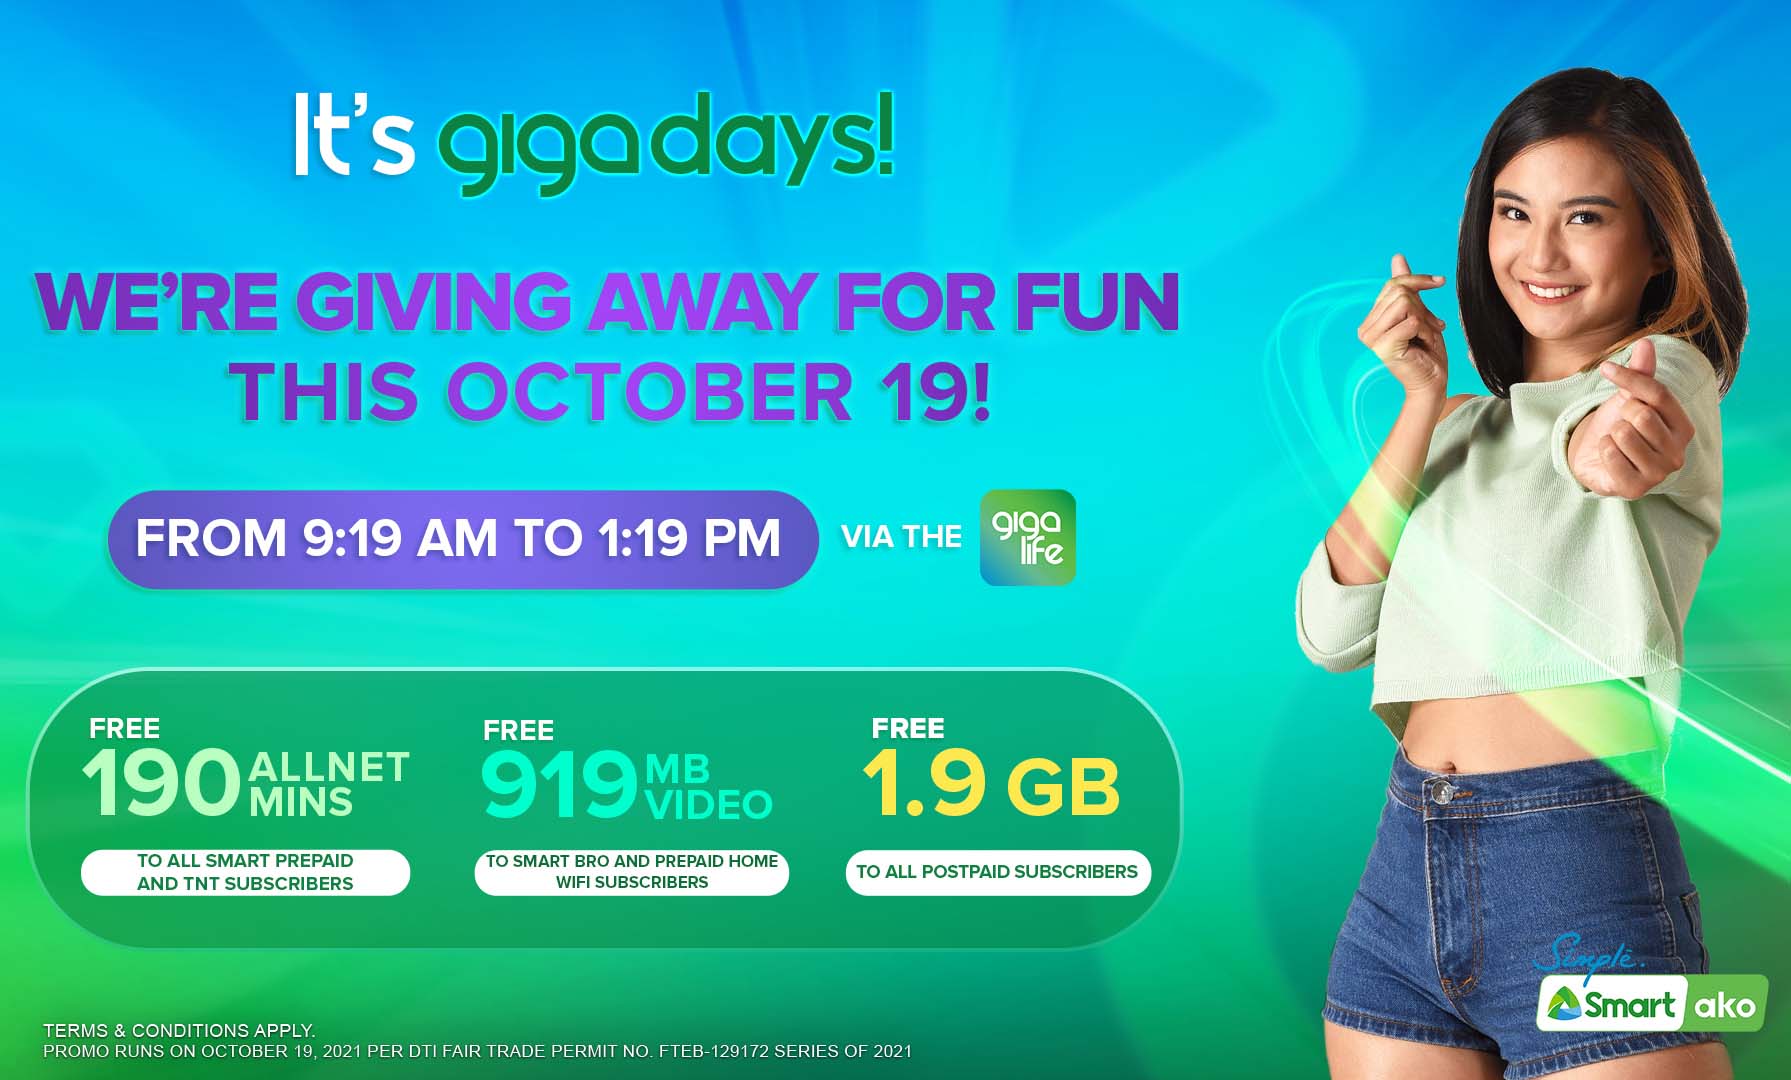 Smart levels up GigaDays with more rewards from Oct. 19 to 22